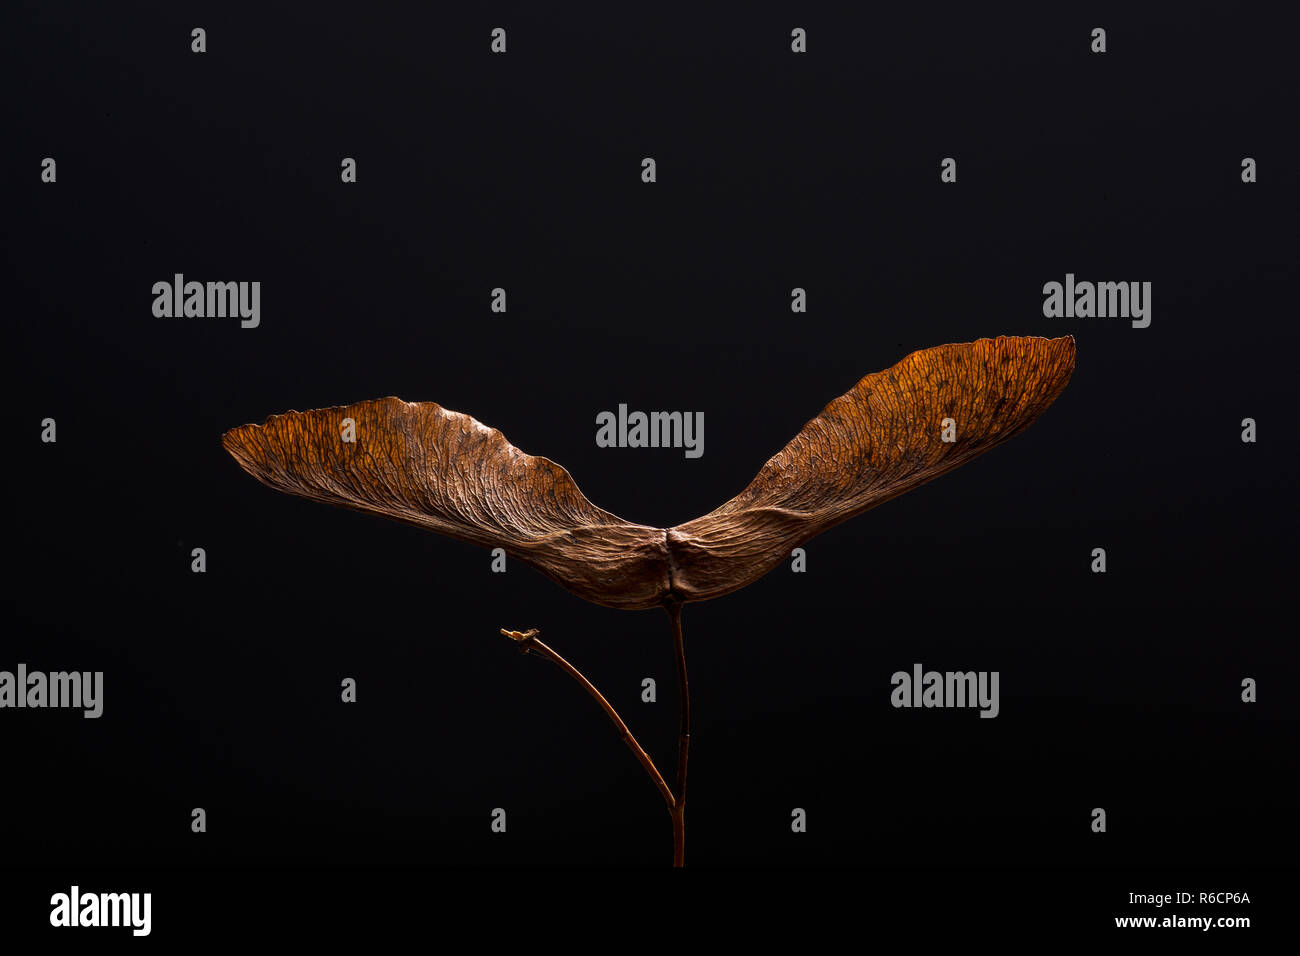 Color image of brown, dried spinning sycamore seed in close up with black background Stock Photo